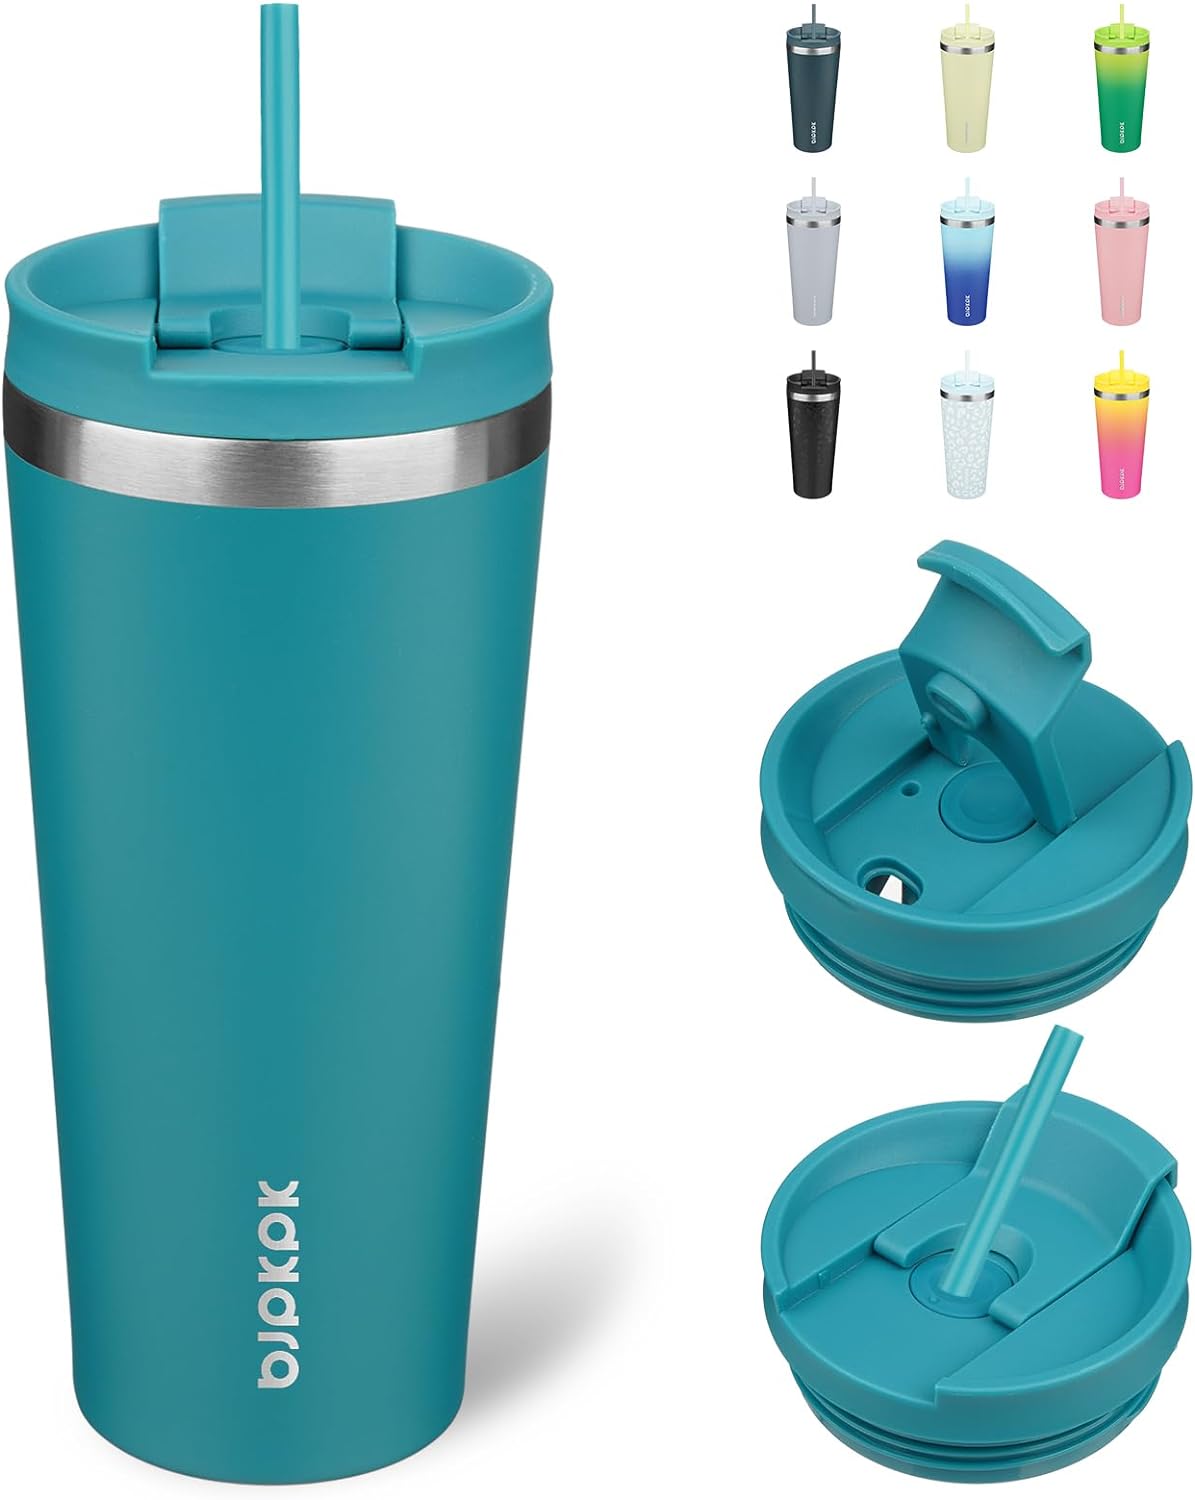 I absolutely love this tumbler! I'm impressed by the raised leopard print, which I hadn't noticed initially in the product photos. It's so pretty, especially in this soft baby blue color. It comes with an extra straw and a replacement rubber straw insert. The lid twists on securely, and the flap closure is very satisfying as it snaps on and off nicely. It kept my coffee hot long enough for me to finish up. Even though there are slits in the straw insert, there was no leakage when I did the upsid